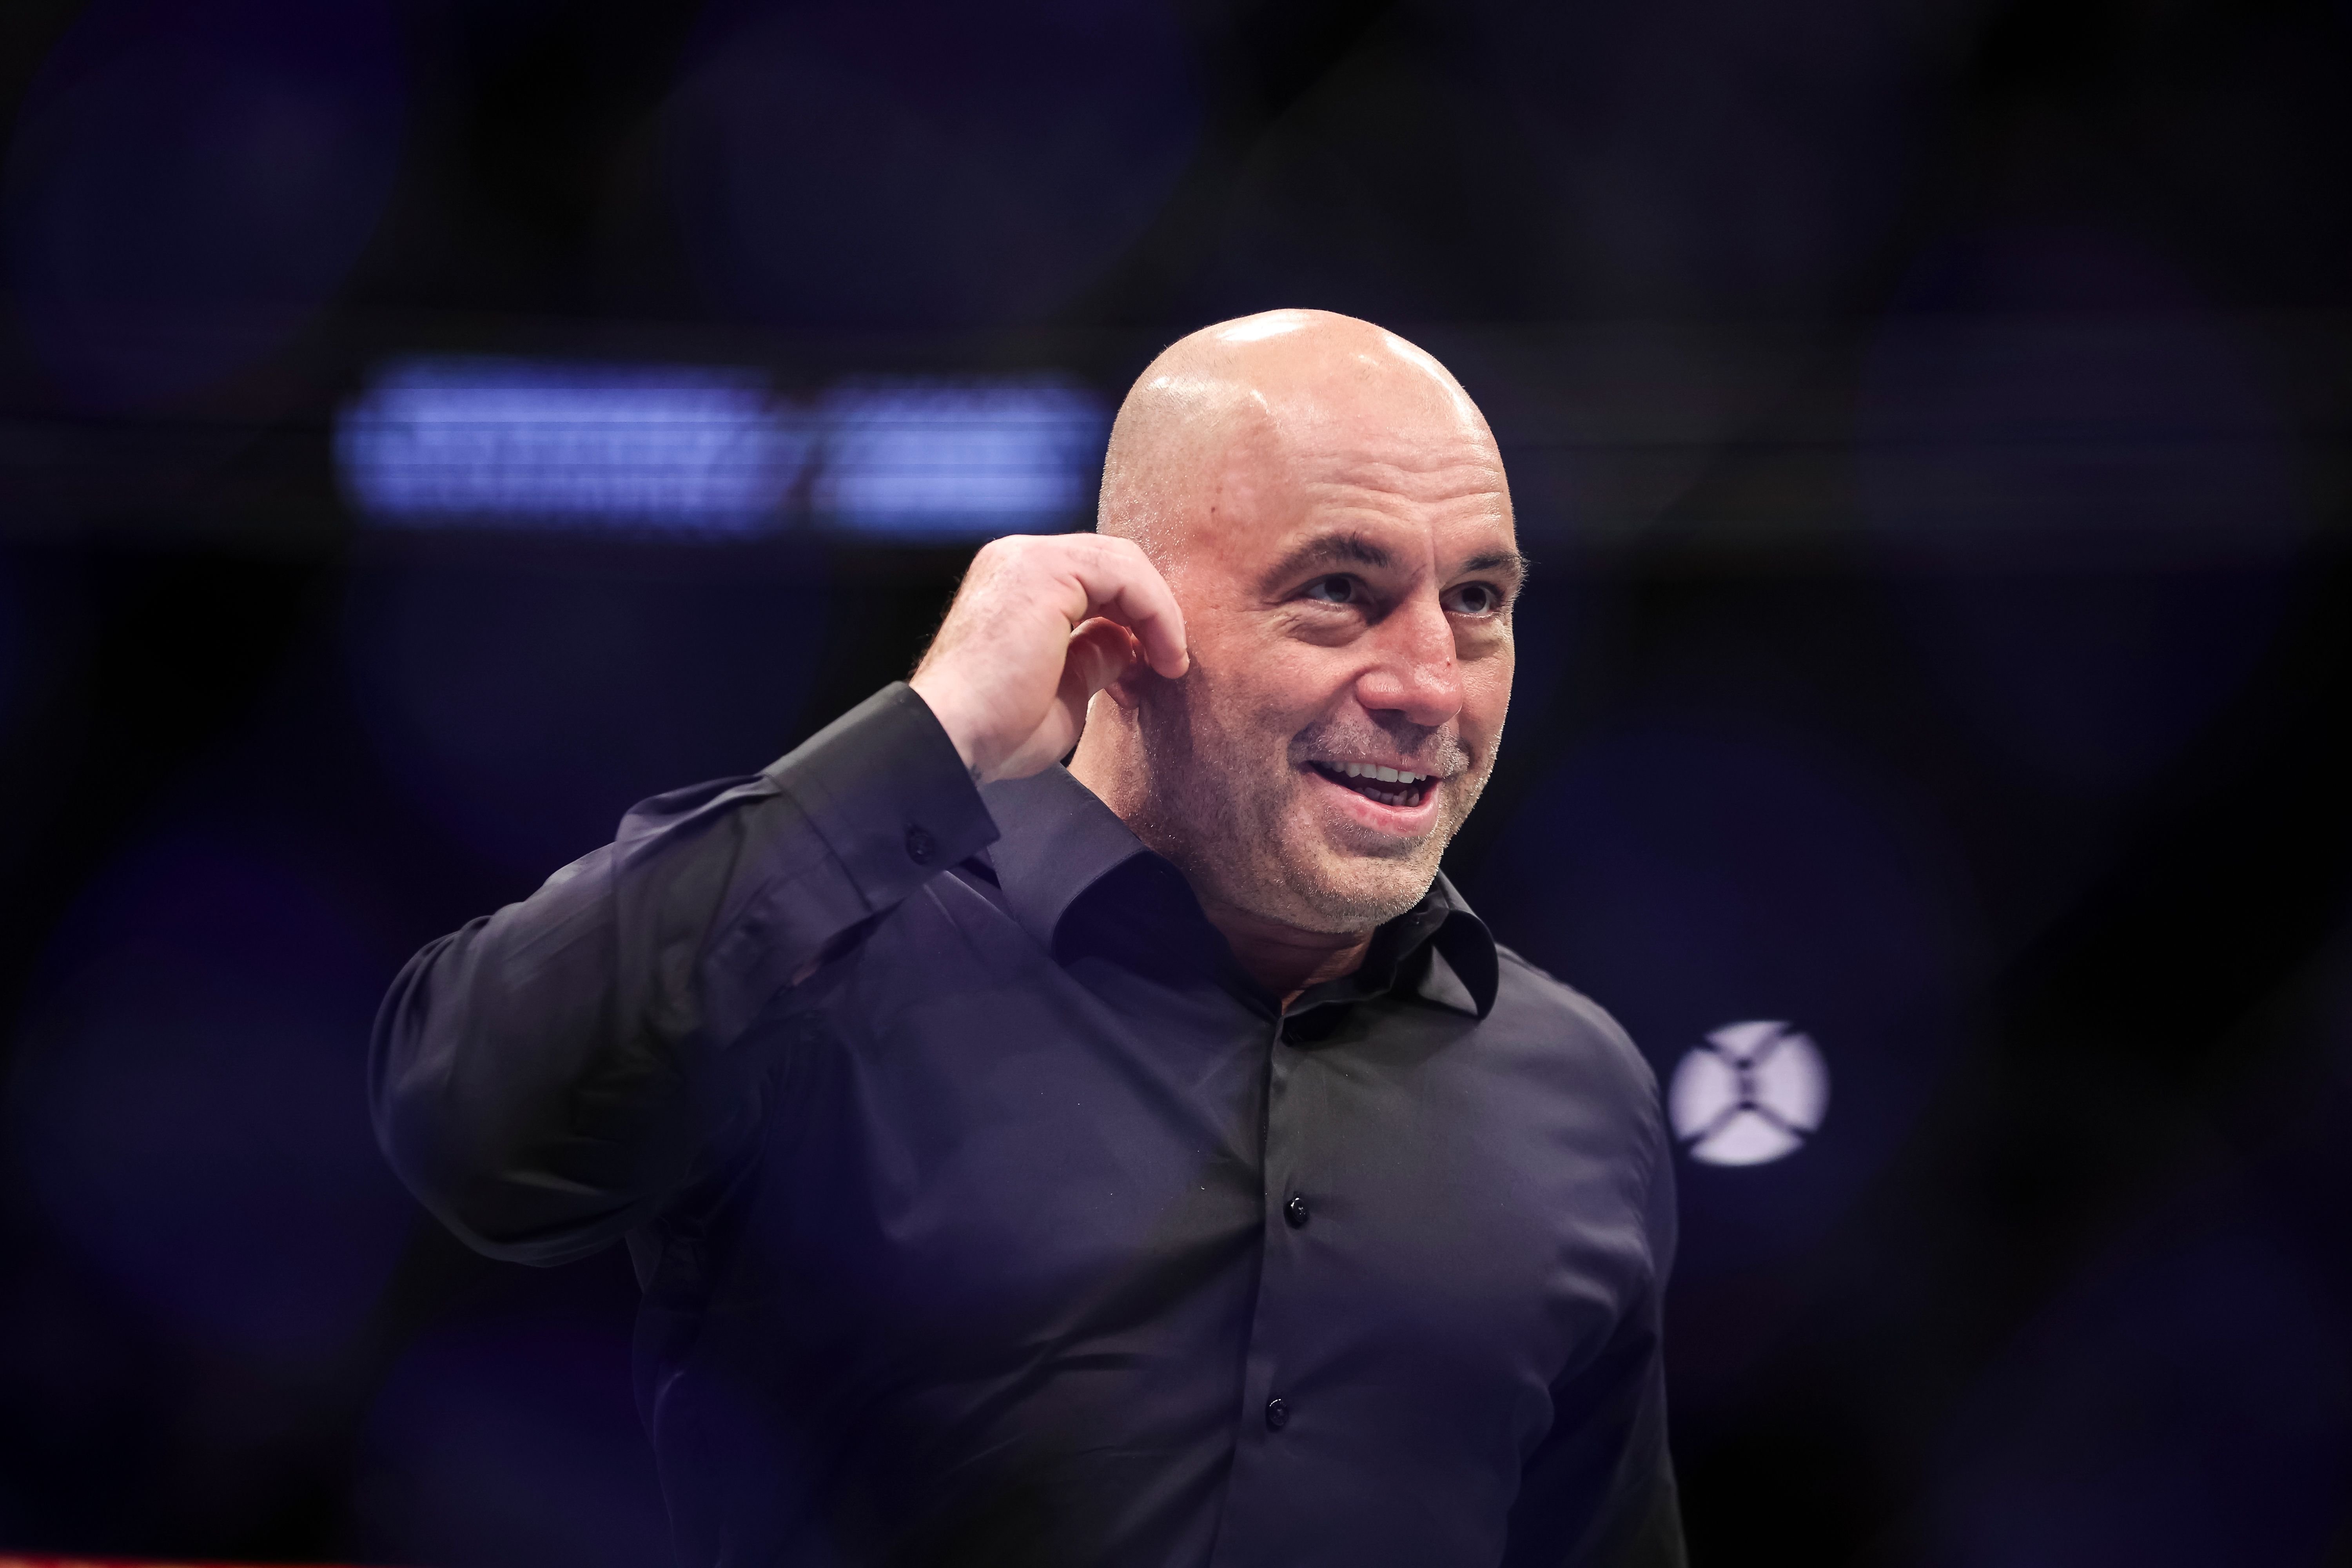 Joe Rogan during the UFC 273 event at VyStar Veterans Memorial Arena on April 09, 2022, in Jacksonville, Florida. | Source: Getty Images